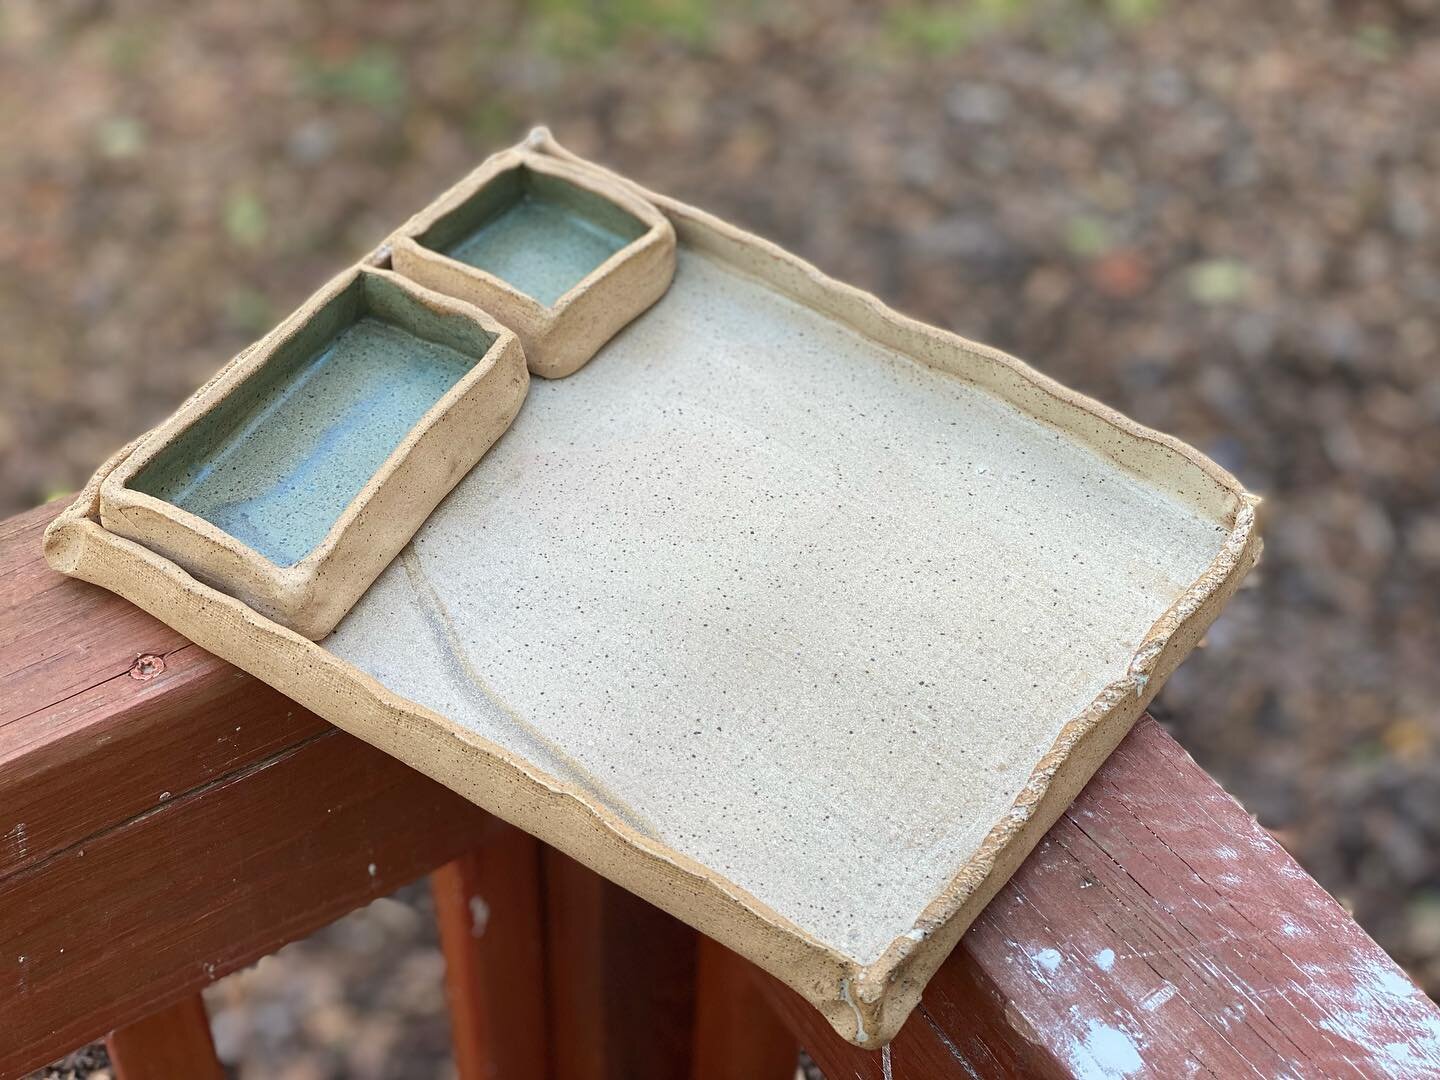 A few pieces I will have tomorrow. The first is a sweet little tray with two removable square condiment boxes. It kind of gives me bento box vibes. The second is a heavy casserole dish. I think I only have 3 of these left. Come see me tomorrow in the